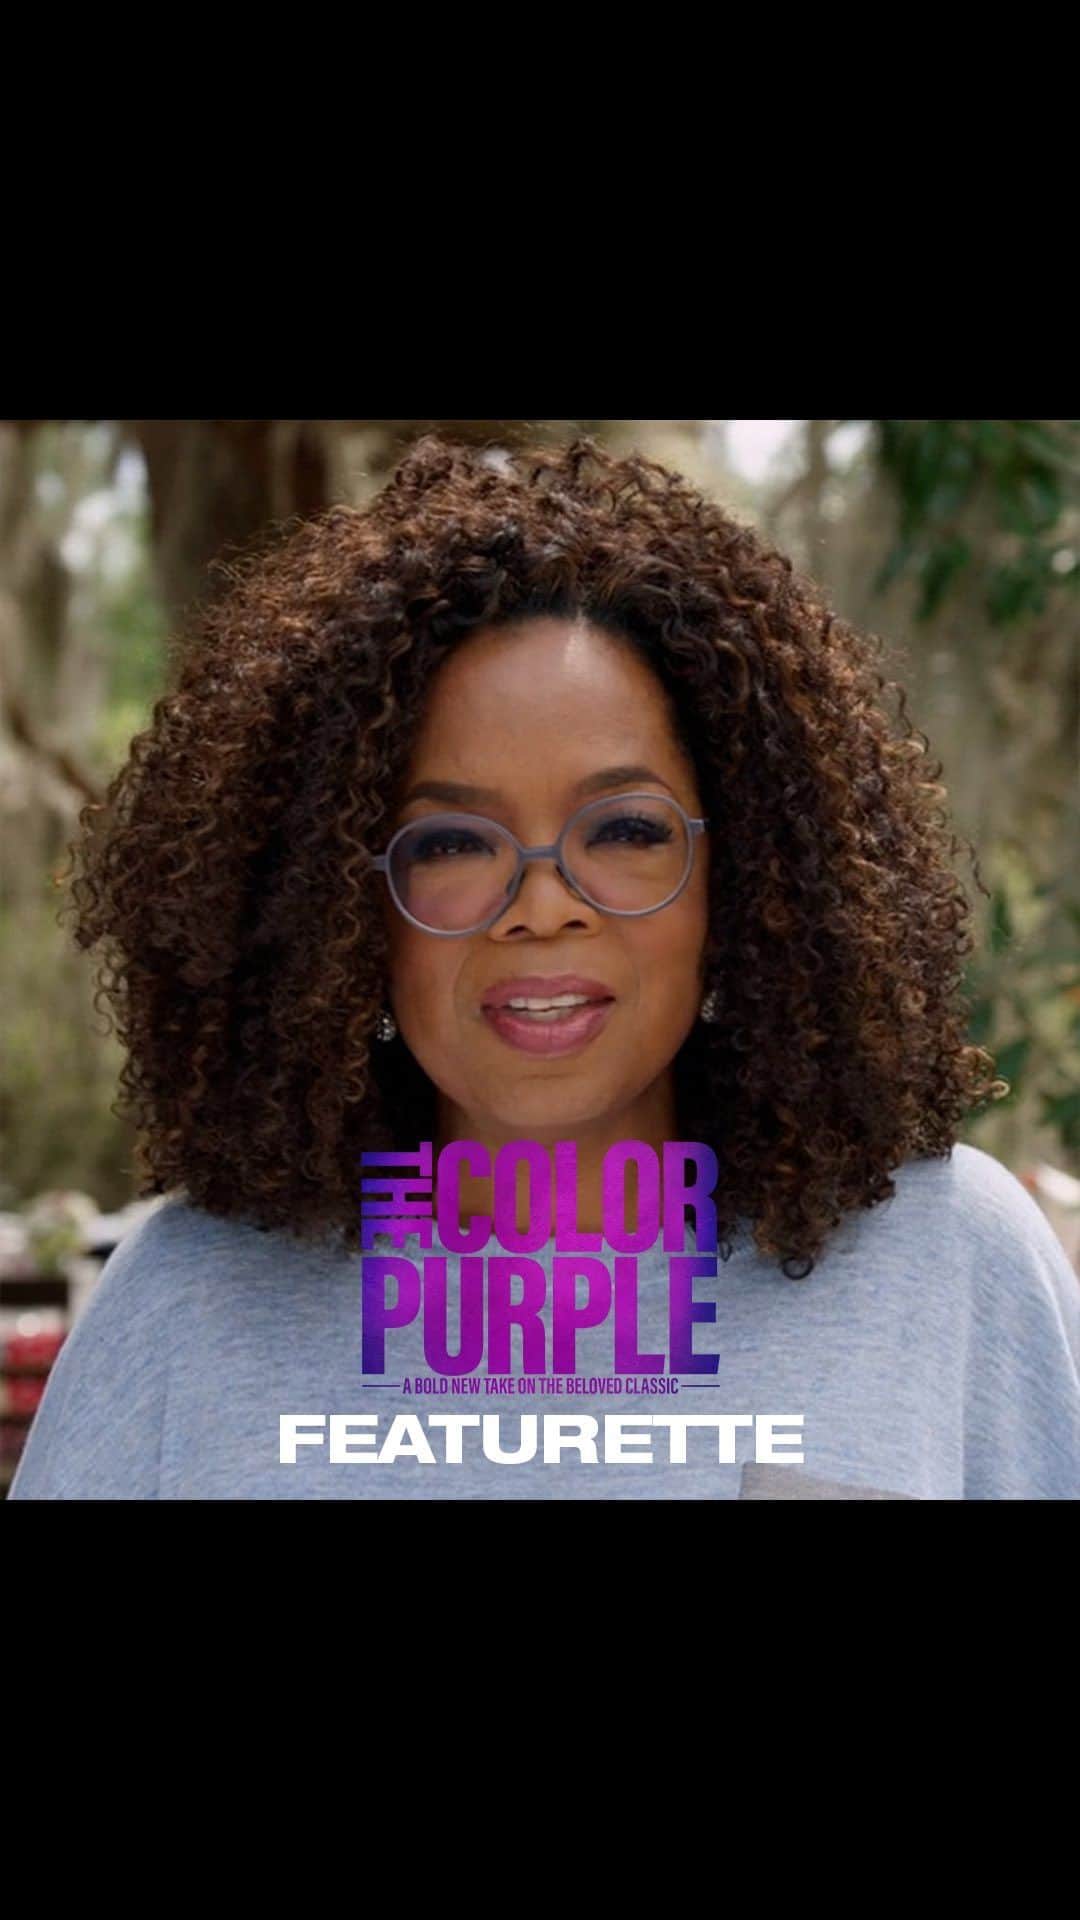 Warner Bros. Picturesのインスタグラム：「Get ready for the bold new take on #TheColorPurple from visionary Director Blitz Bazawule and Producers Oprah Winfrey, Quincy Jones, Steven Spielberg and Scott Sanders. Only in theaters this Christmas.💜 Previously recorded.」